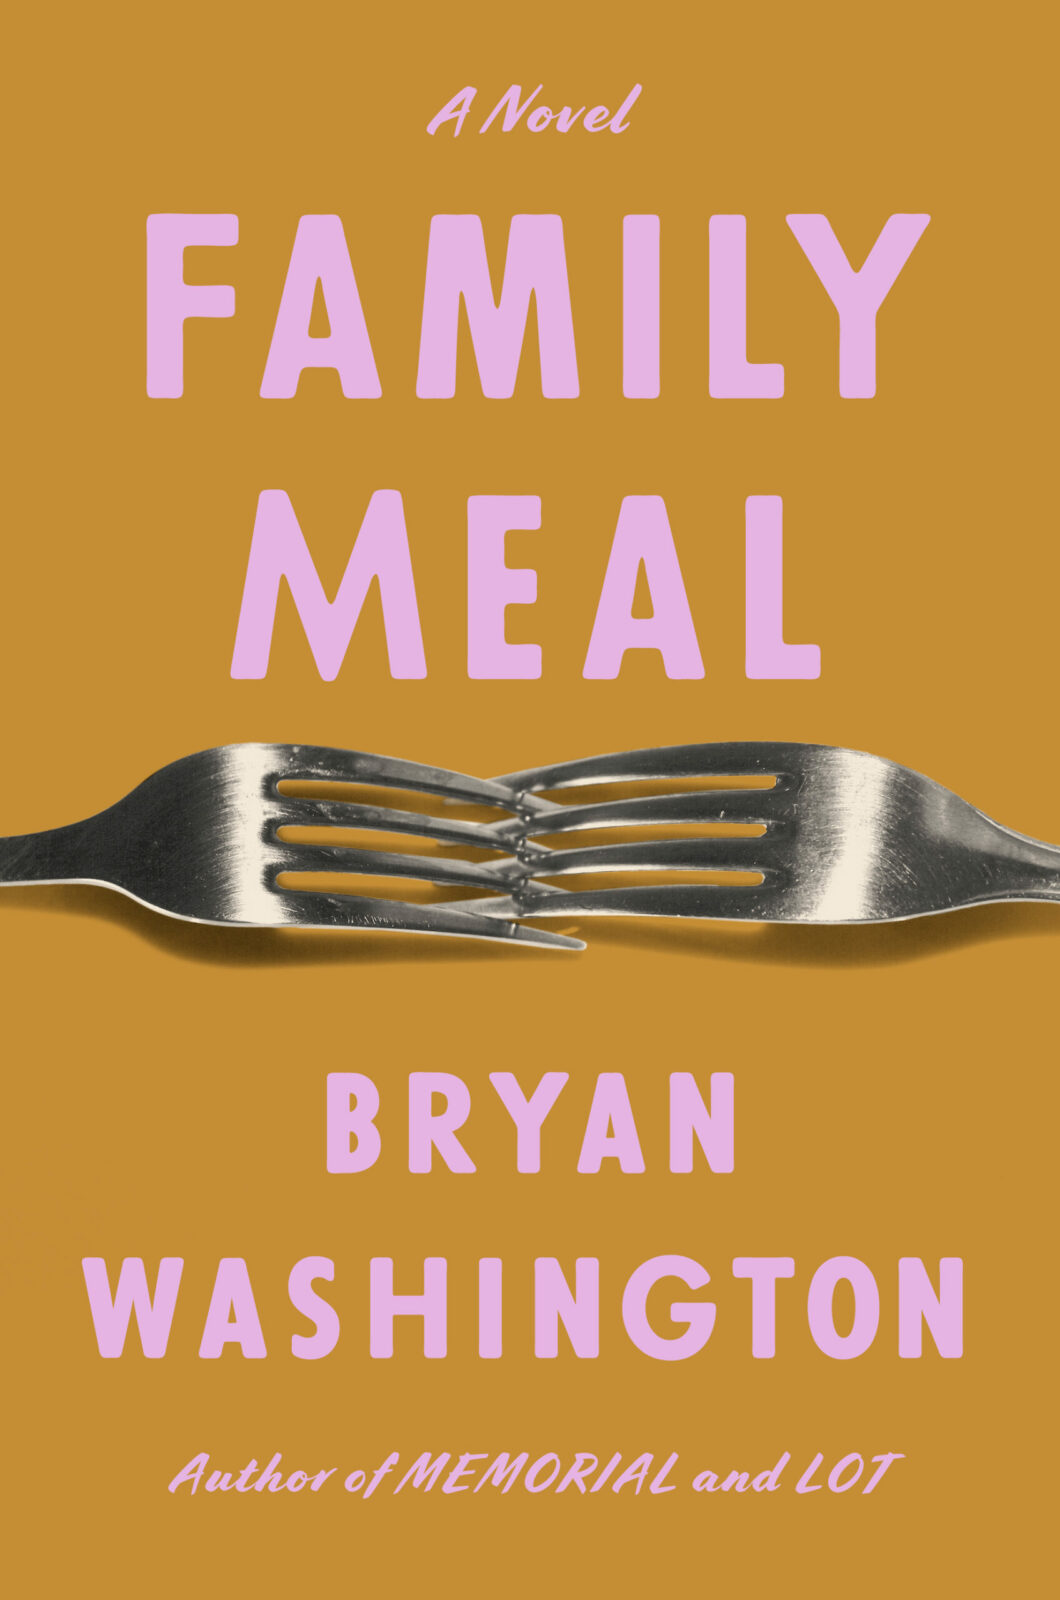 FAMILY-MEAL-cover-Eliana-Cohen-Orth-scaled